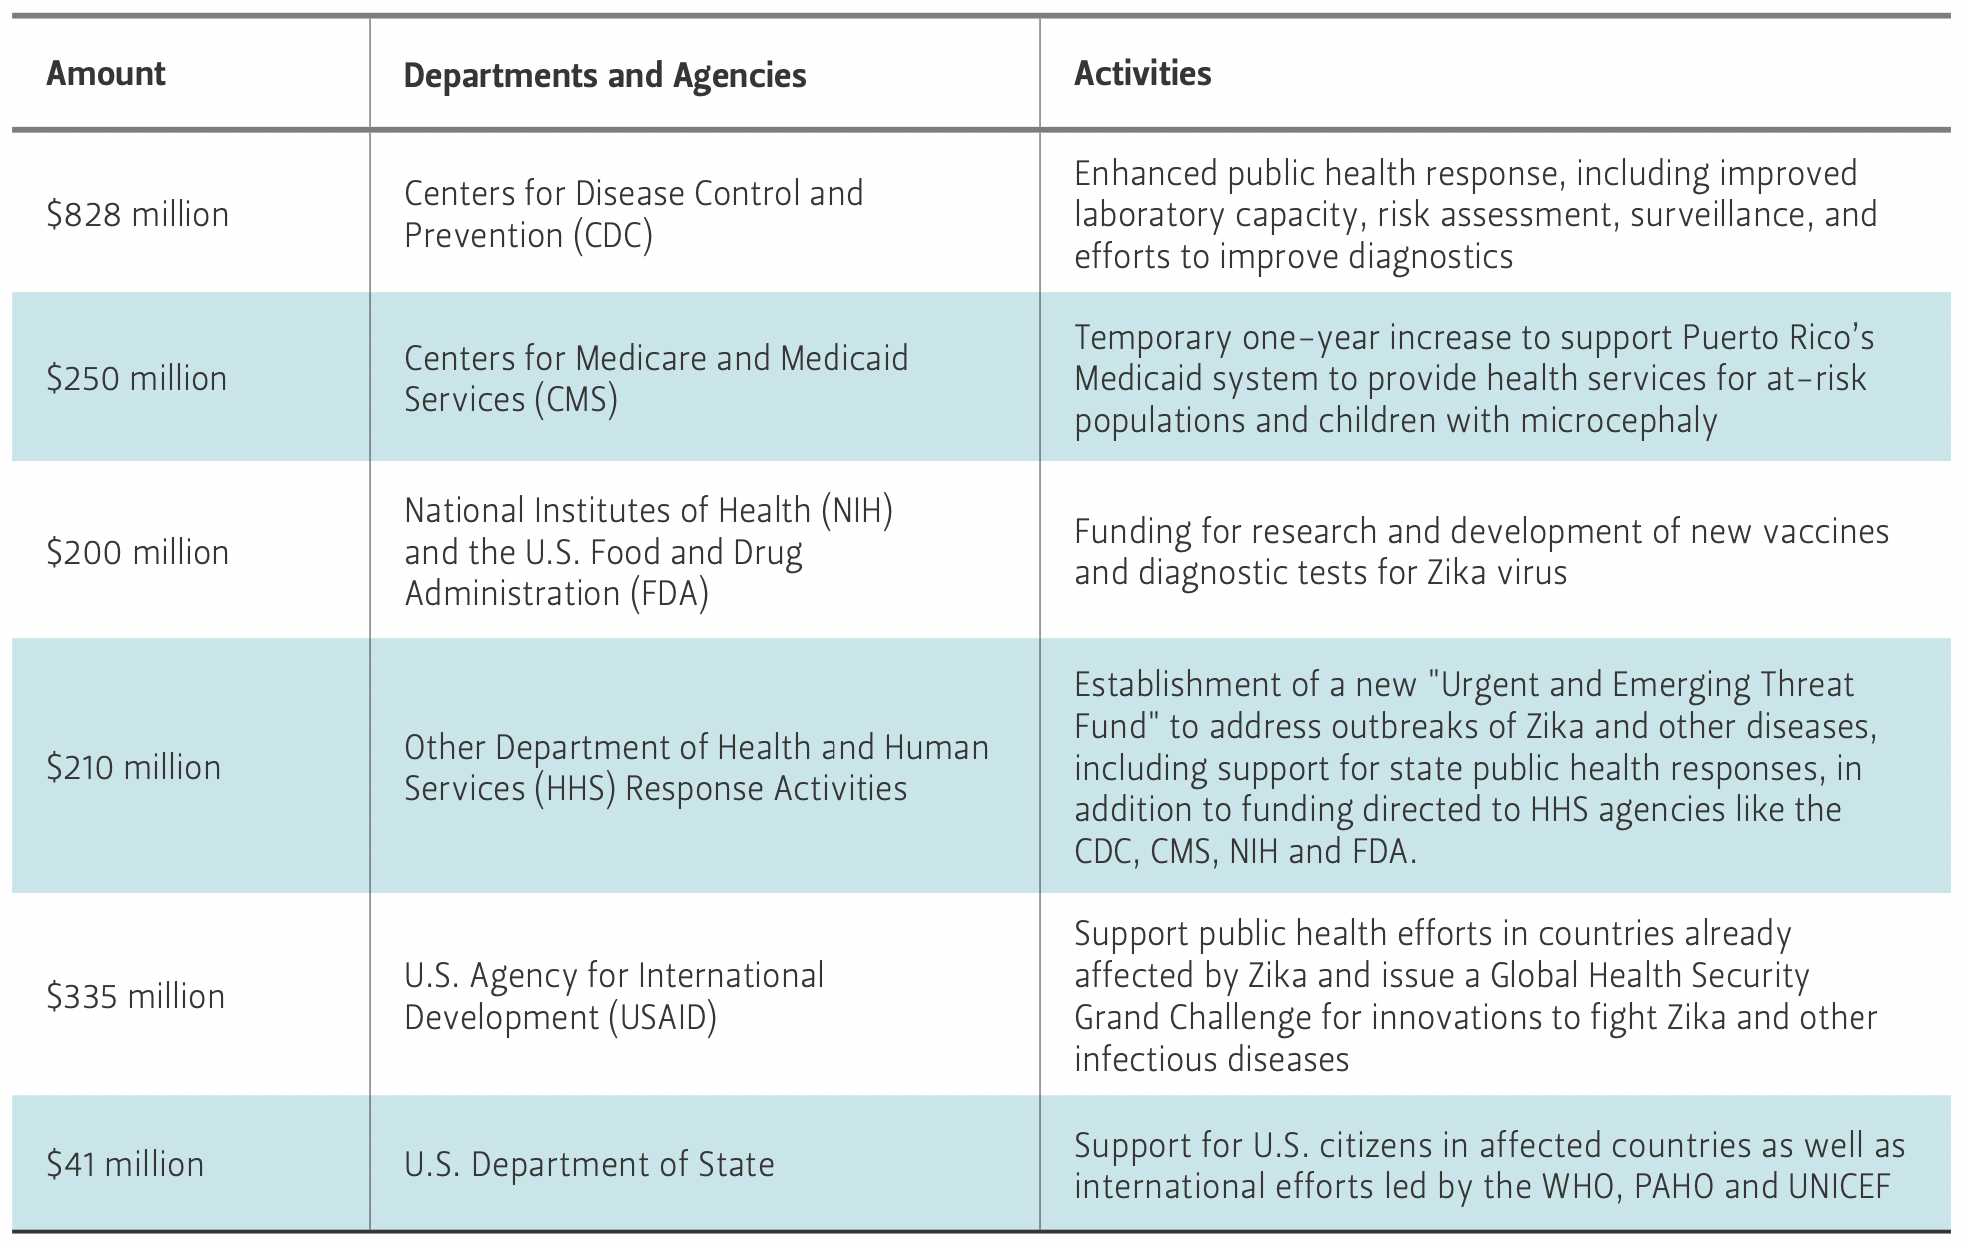 This table compares proposed emergency Zika funding in the U.S.